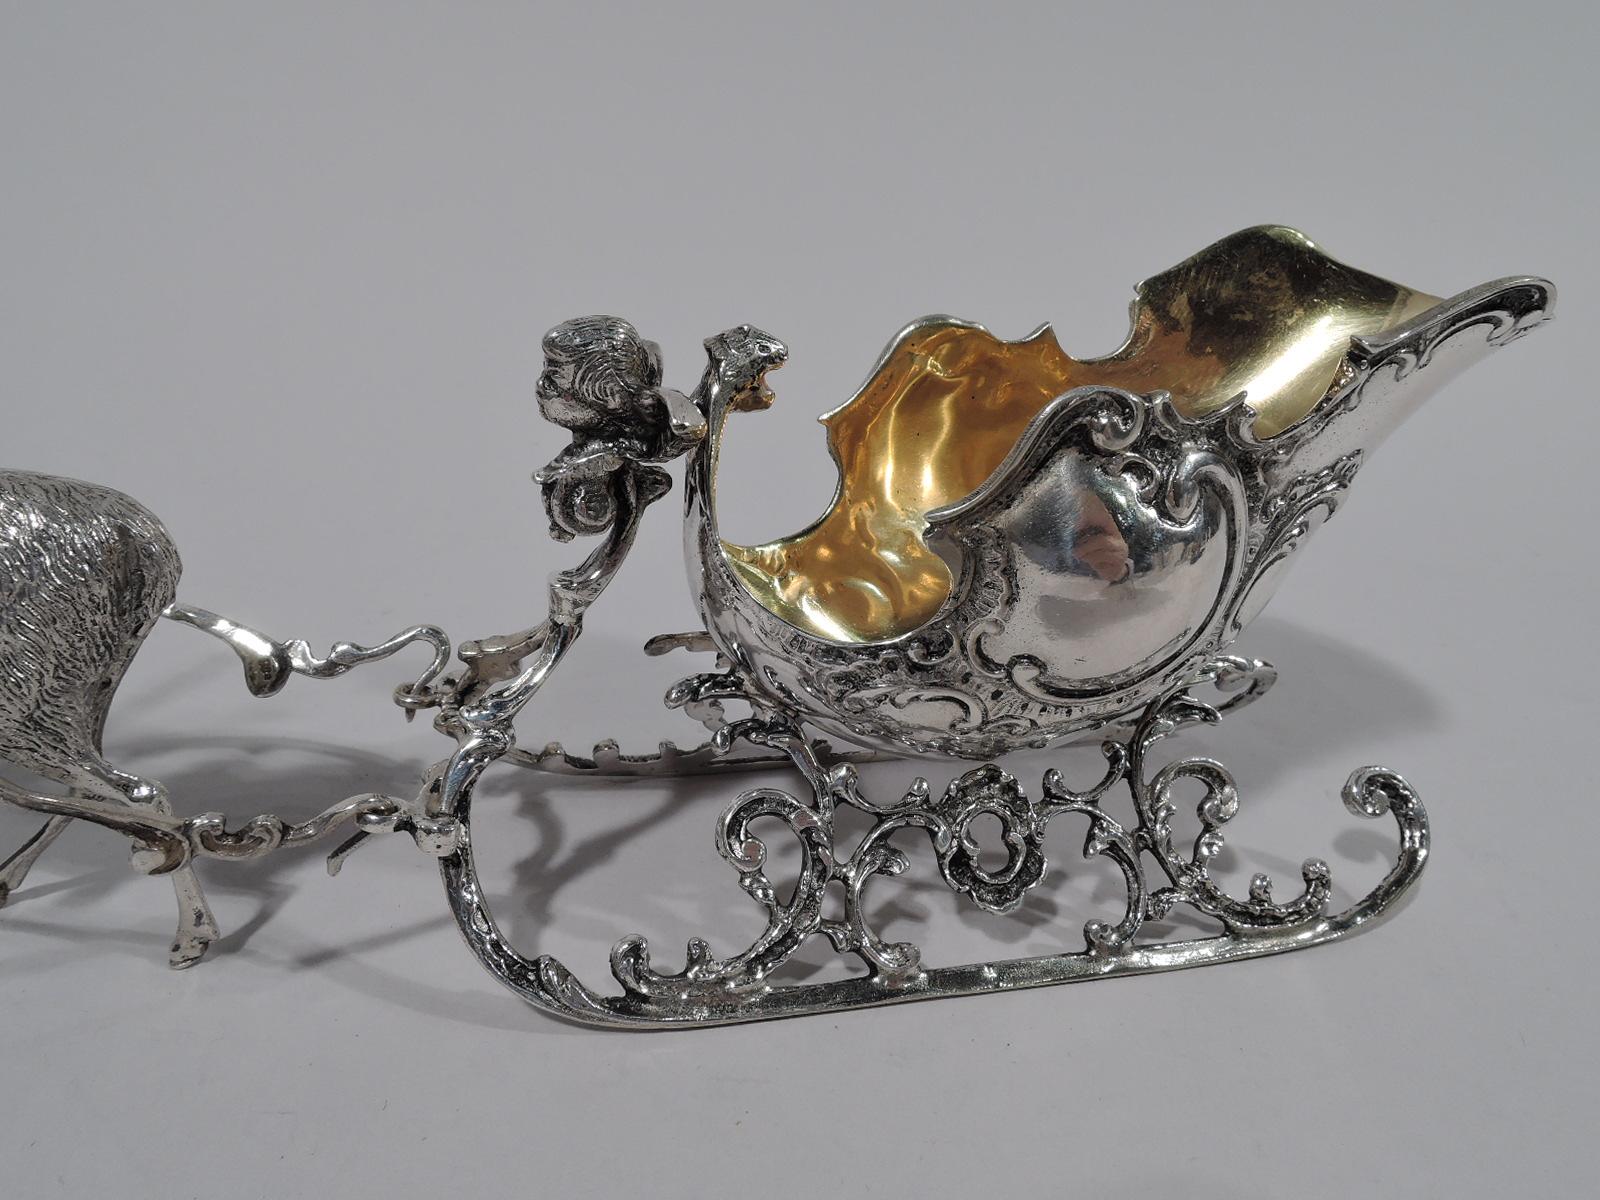 silver reindeer and sleigh